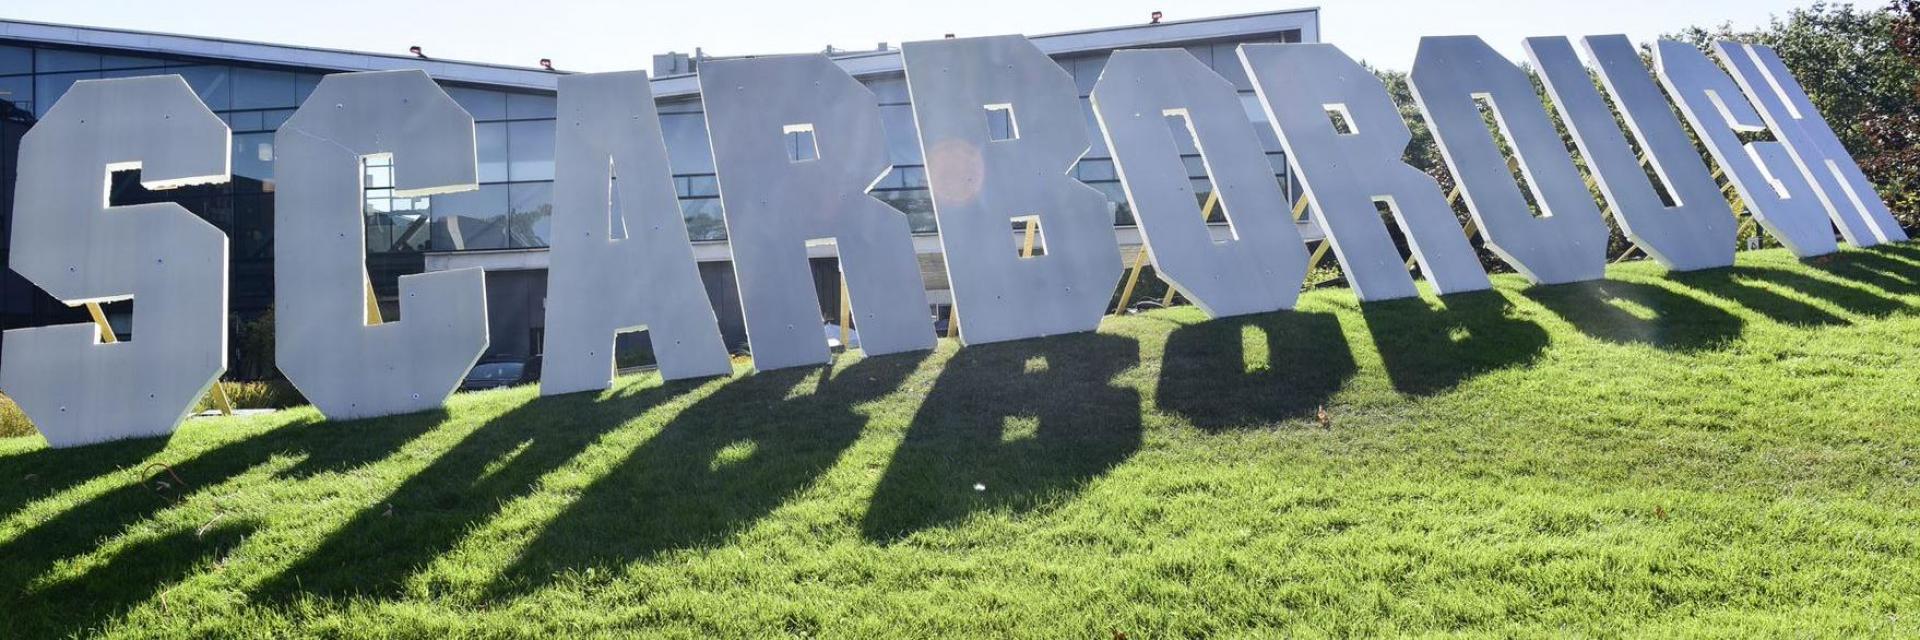 Scarborough sign on lawn